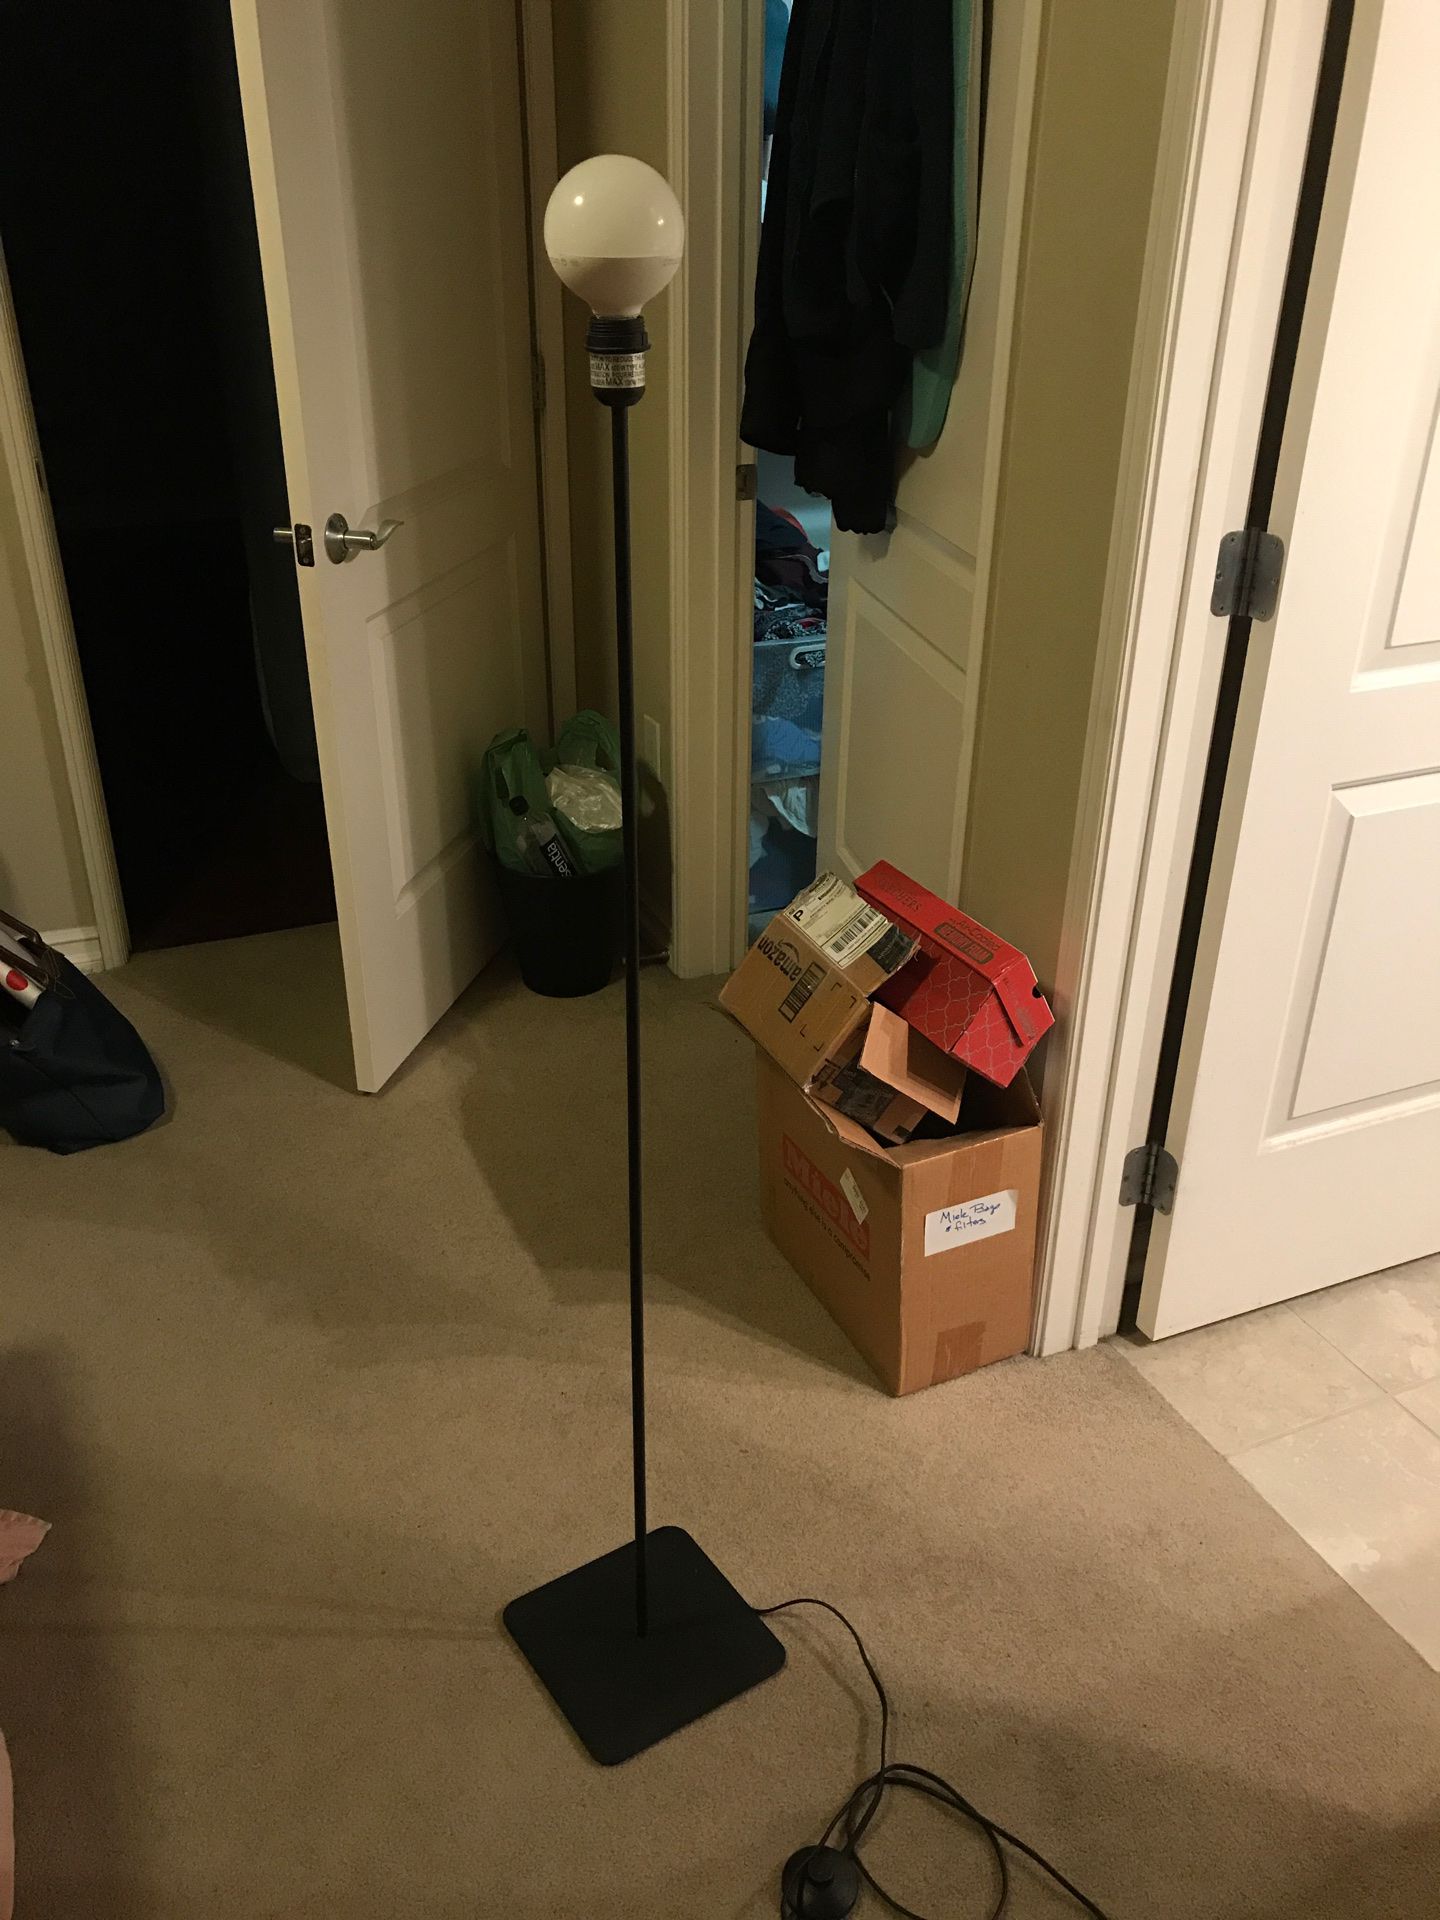 Simple IKEA floor lamp with LED lamp (no lamp shade)